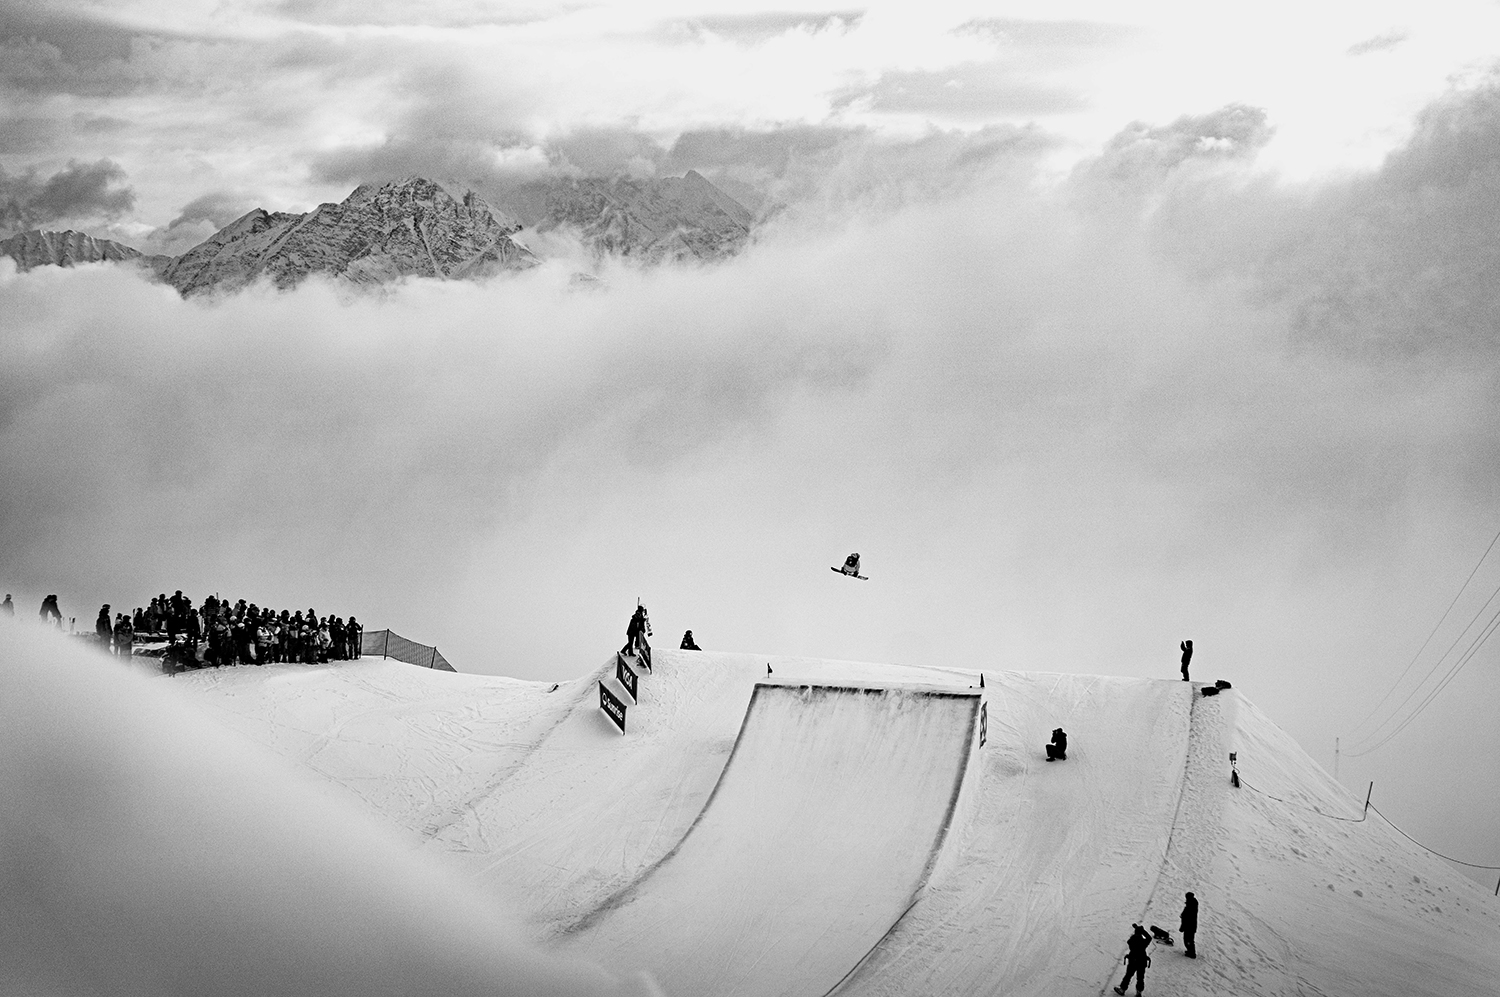 laax-open-whiteout-marcus-kleveland-spin-to-win